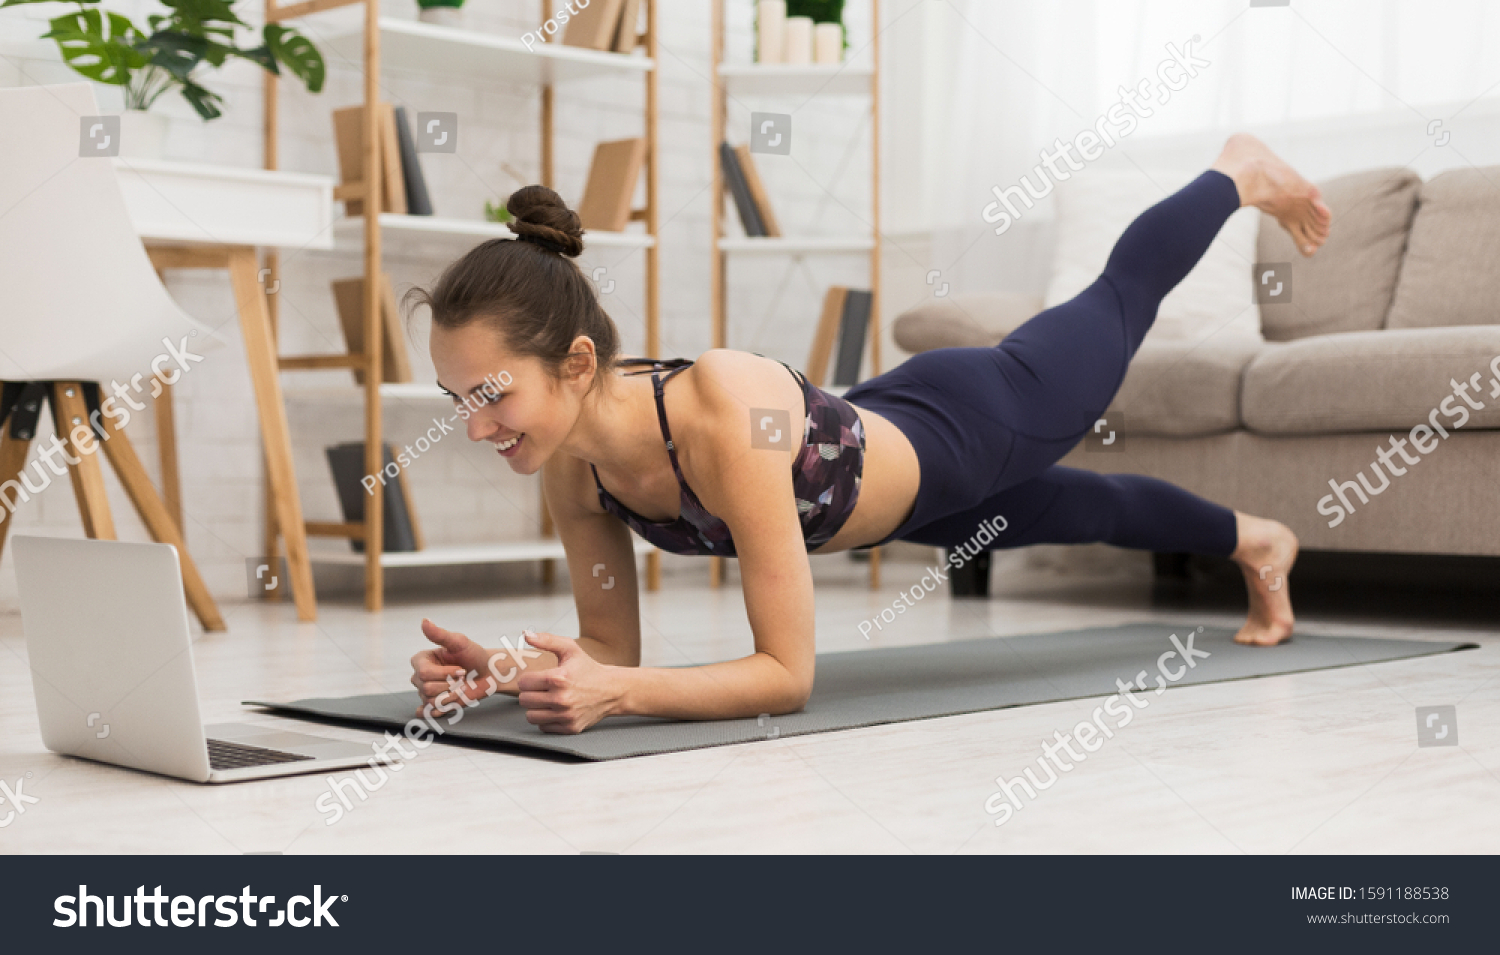 Fit woman doing yoga plank and watching online tutorials on laptop, training in living room #1591188538